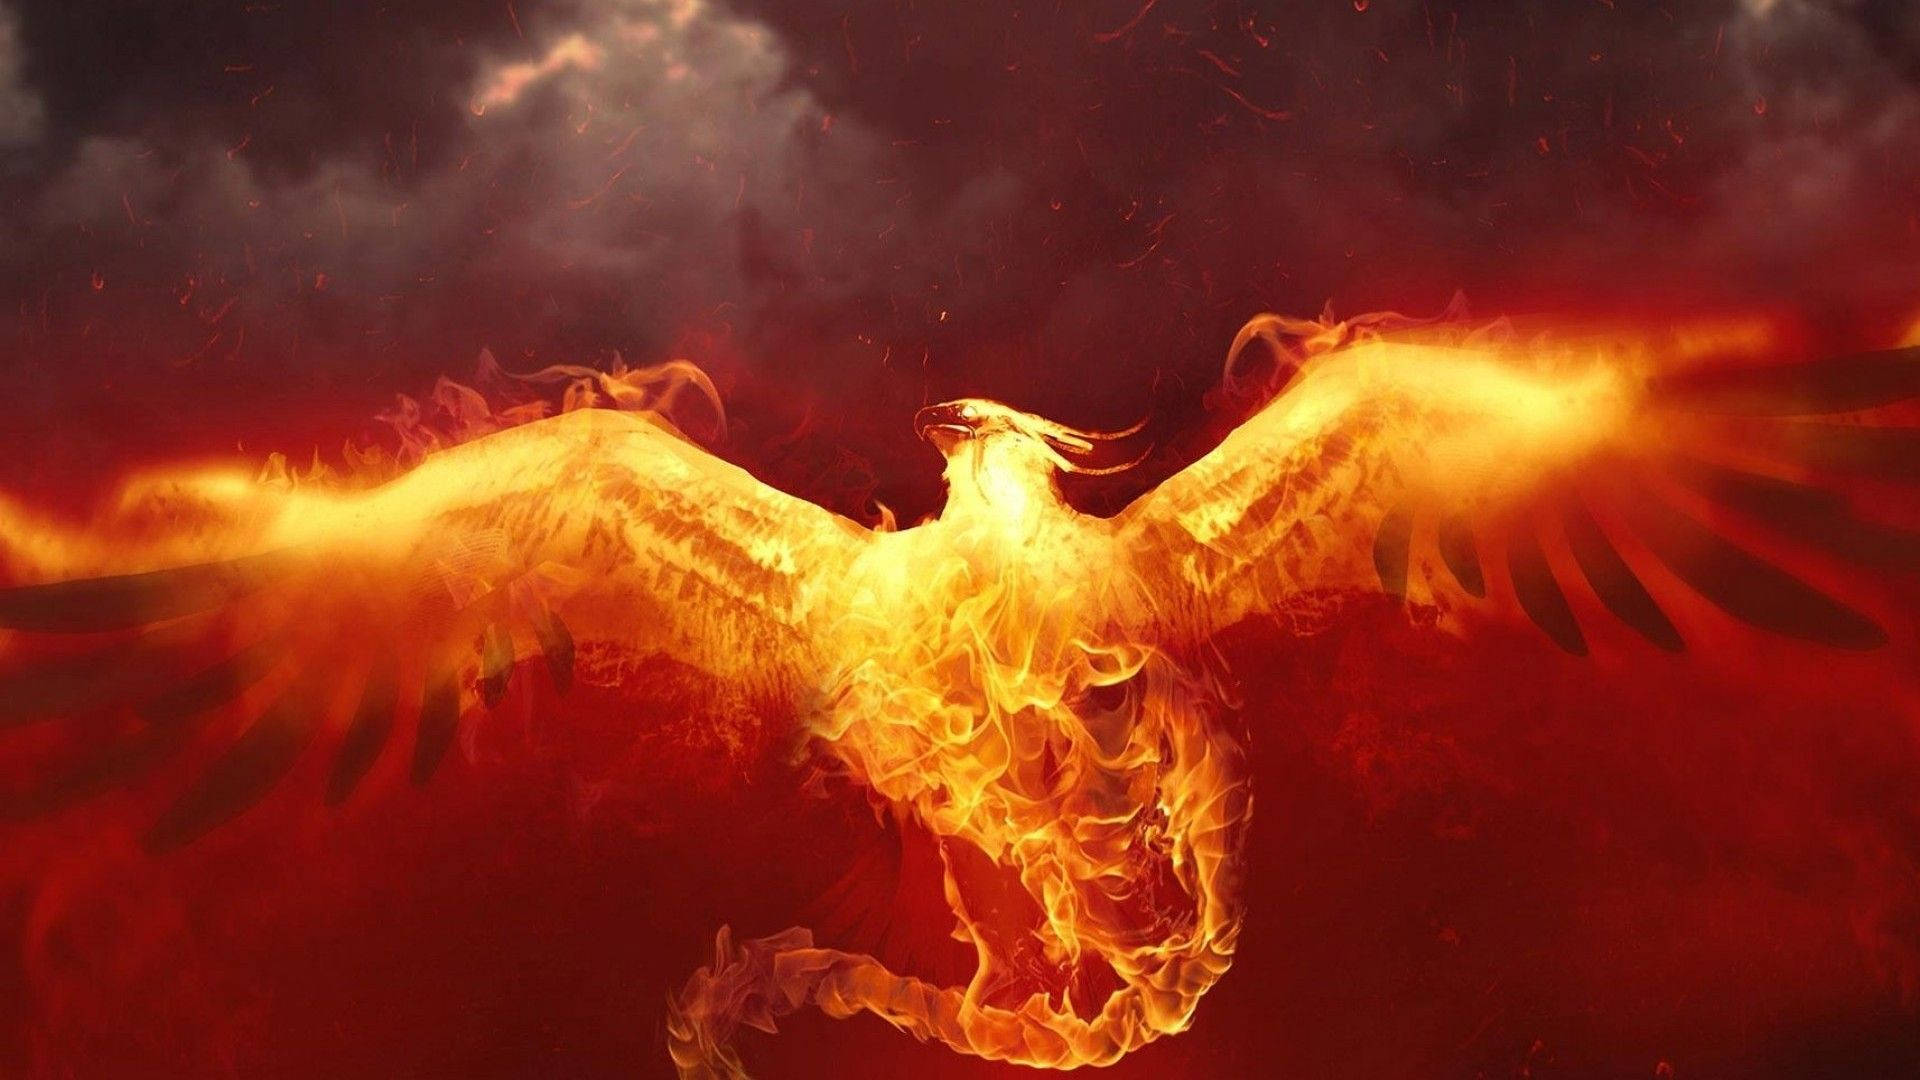 Phoenix 1920X1080 Wallpaper and Background Image